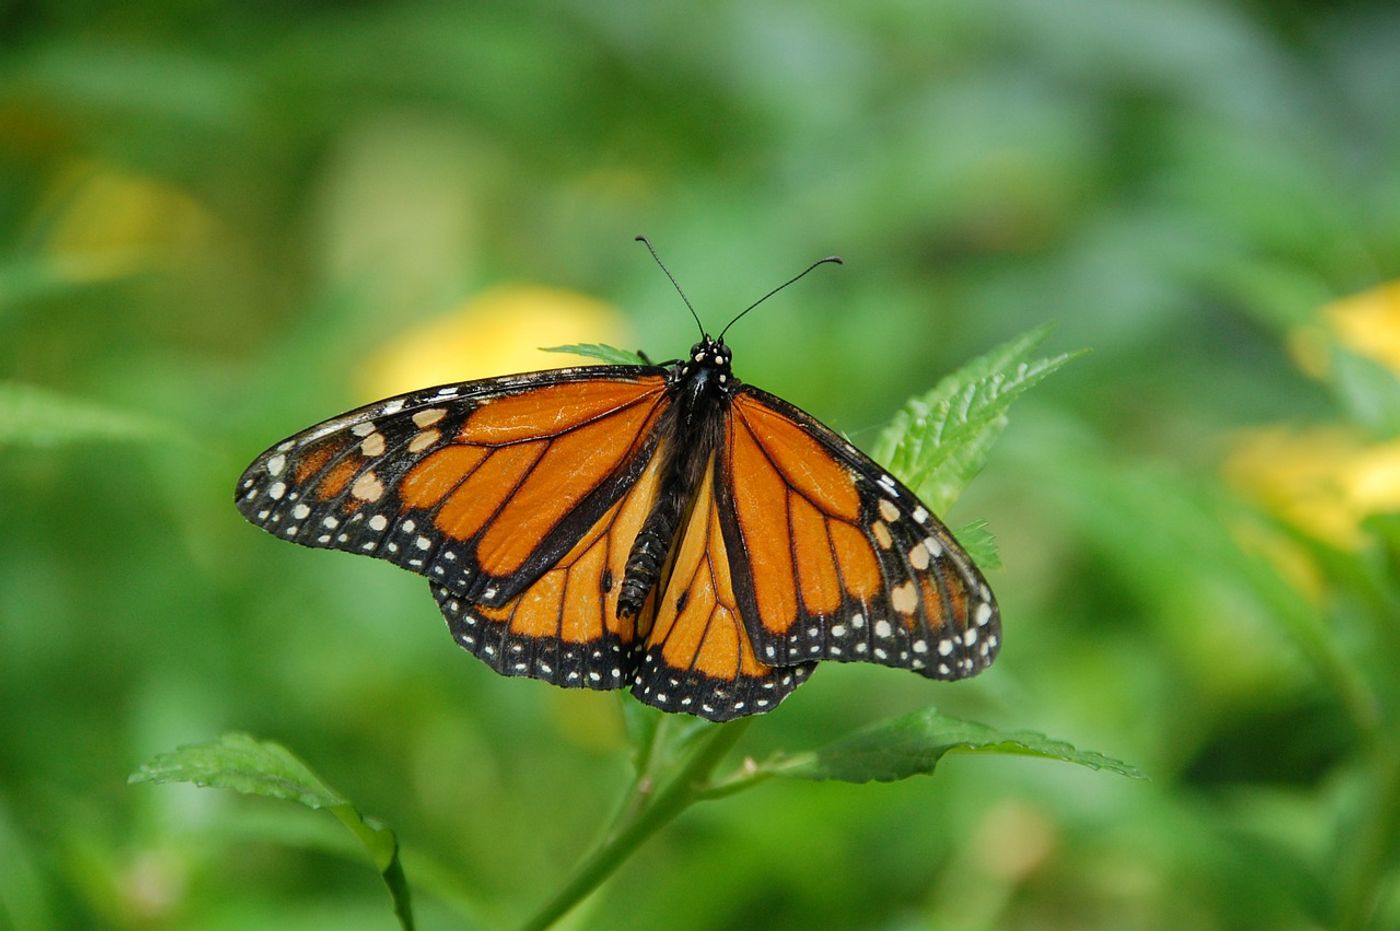 Monarch butterflies are in some trouble, and the time to act is now.